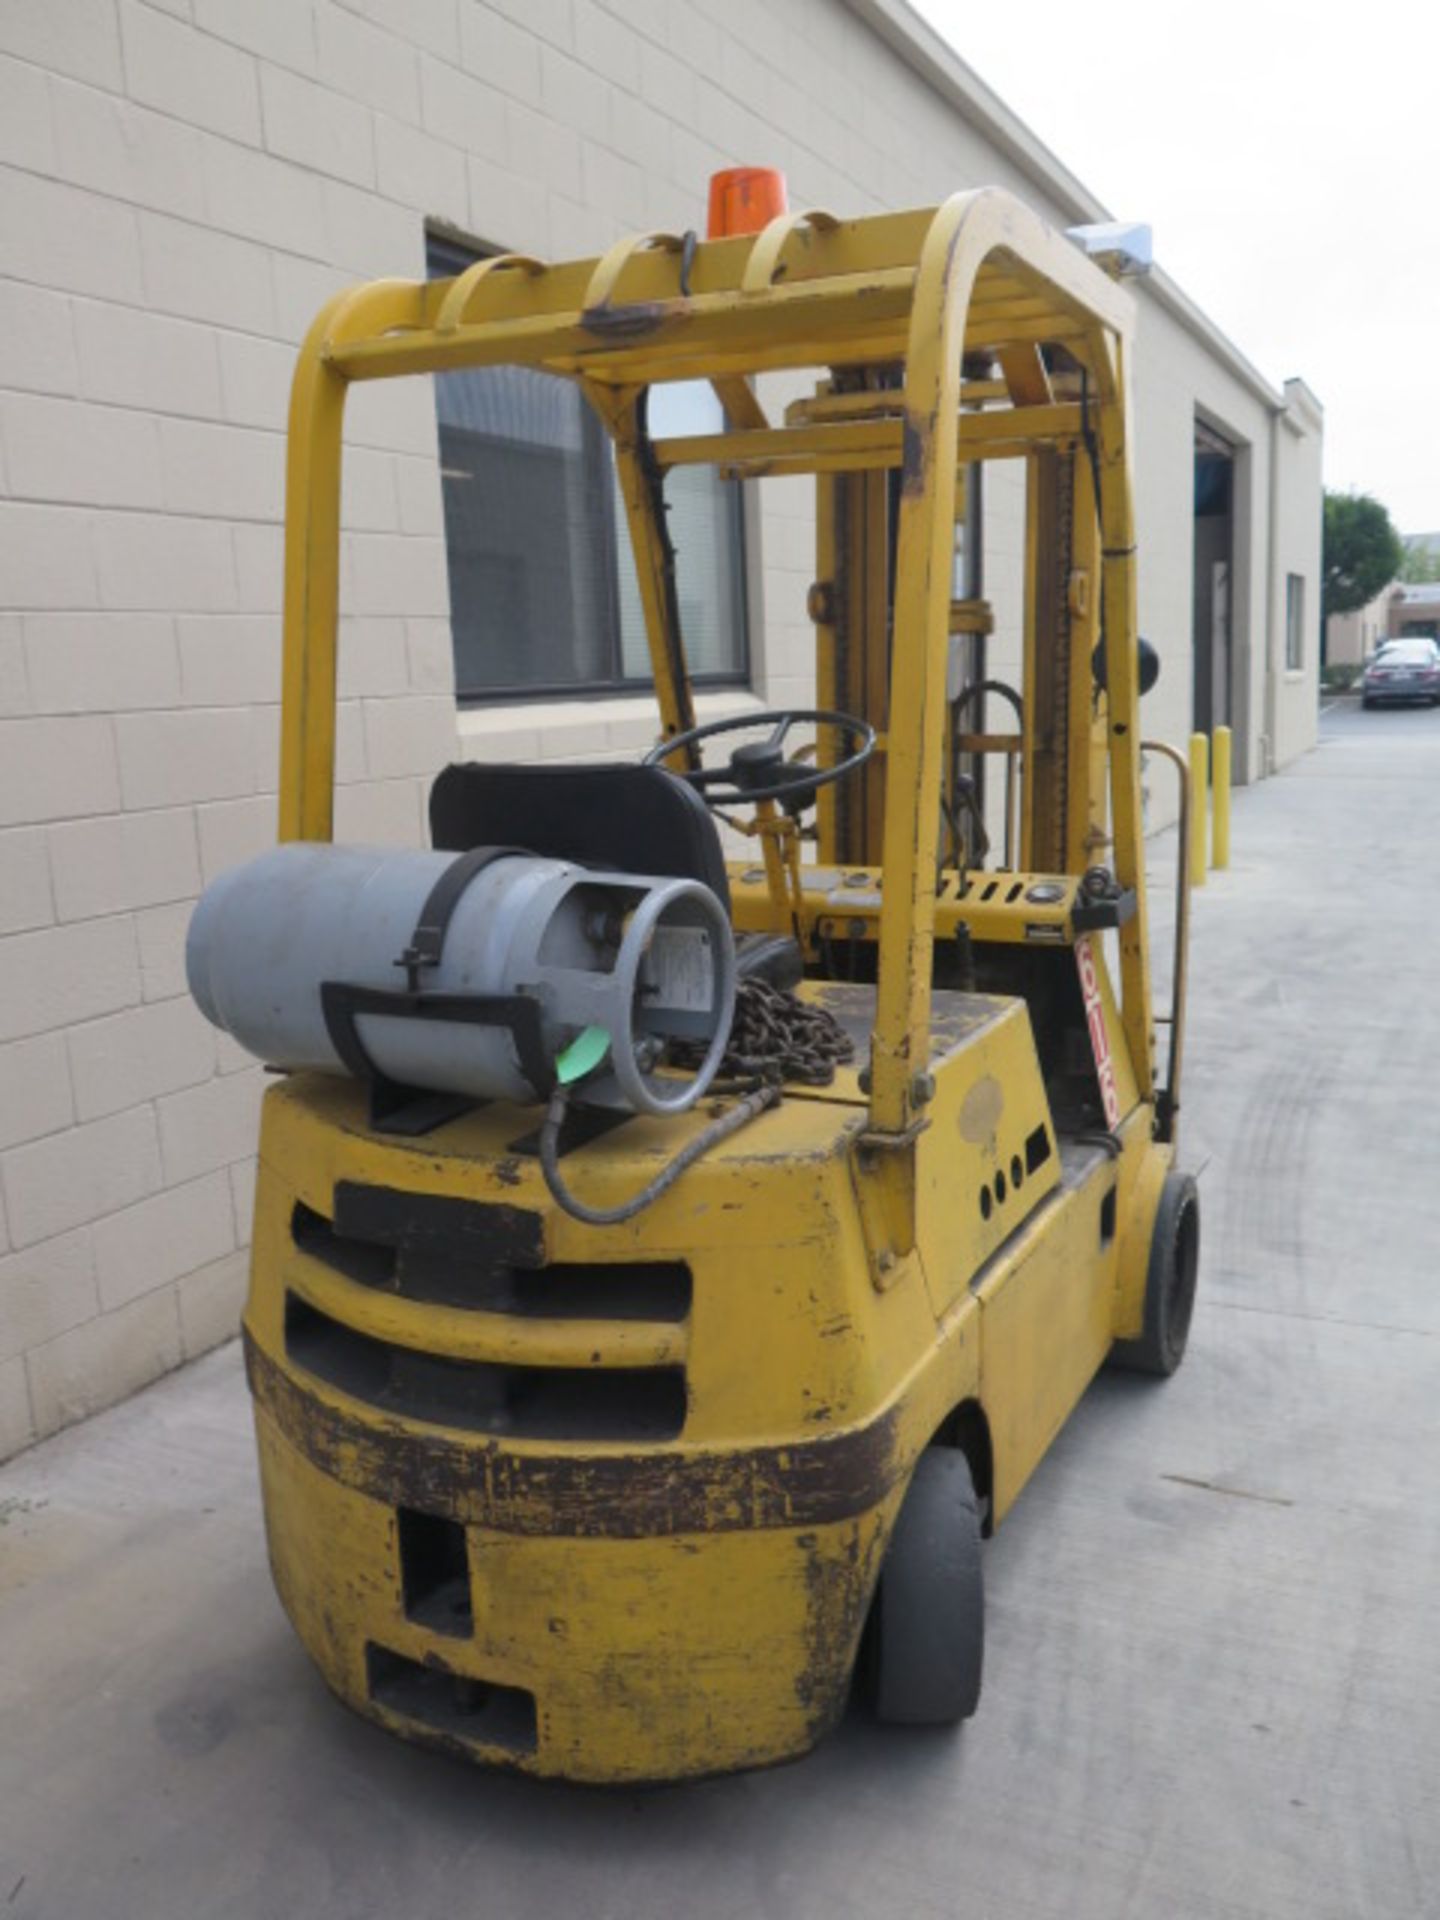 Toyota 02-FGC25 2400 Lb Cap LPG Forklift s/n 02-FGC25-10908 w/ 3-Stage Mast, 185” Lift Height, - Image 3 of 7